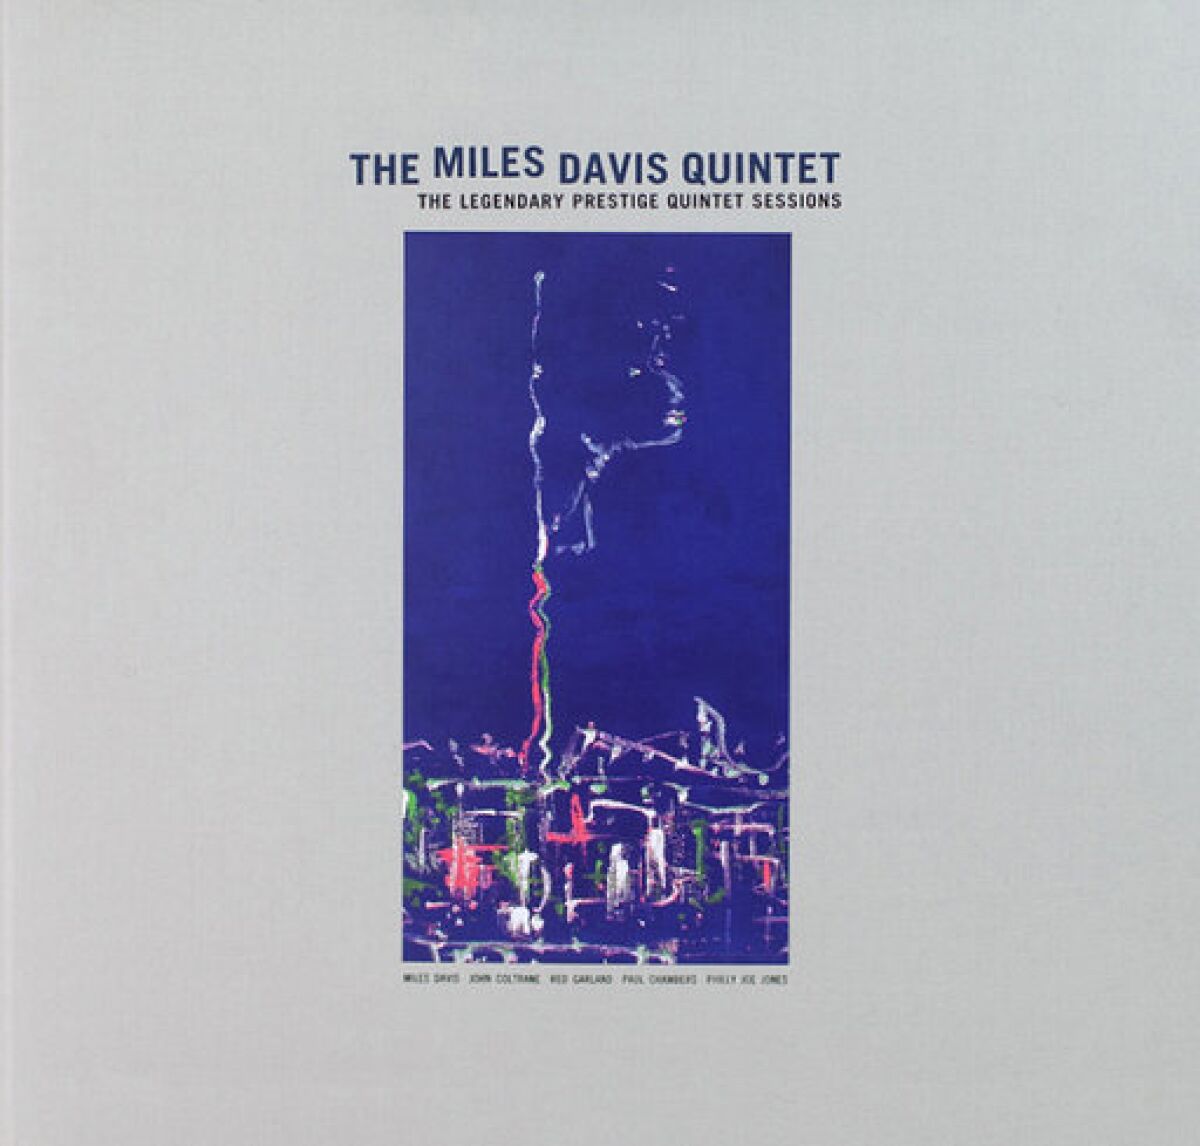 Miles Davis and his all-star quintet set an enduring template for small-group jazz ensembles with the album they recorded for Prestige Records in the 1950s. Those five releases are available in a new, all-vinyl record box set that was made using hi-res digital transfers of the original analog tapes.